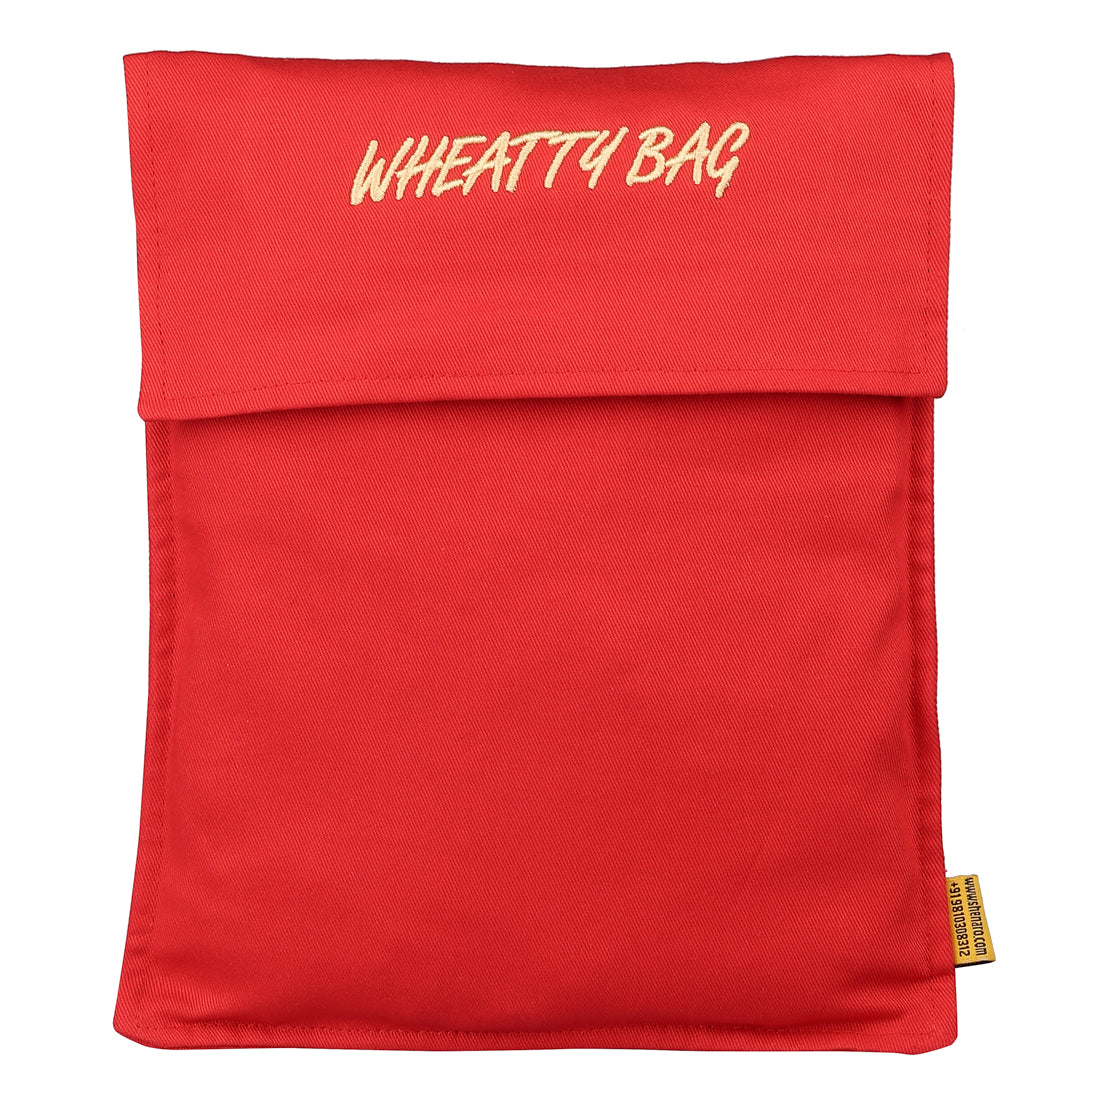 Wheatty Bag Pain Relief